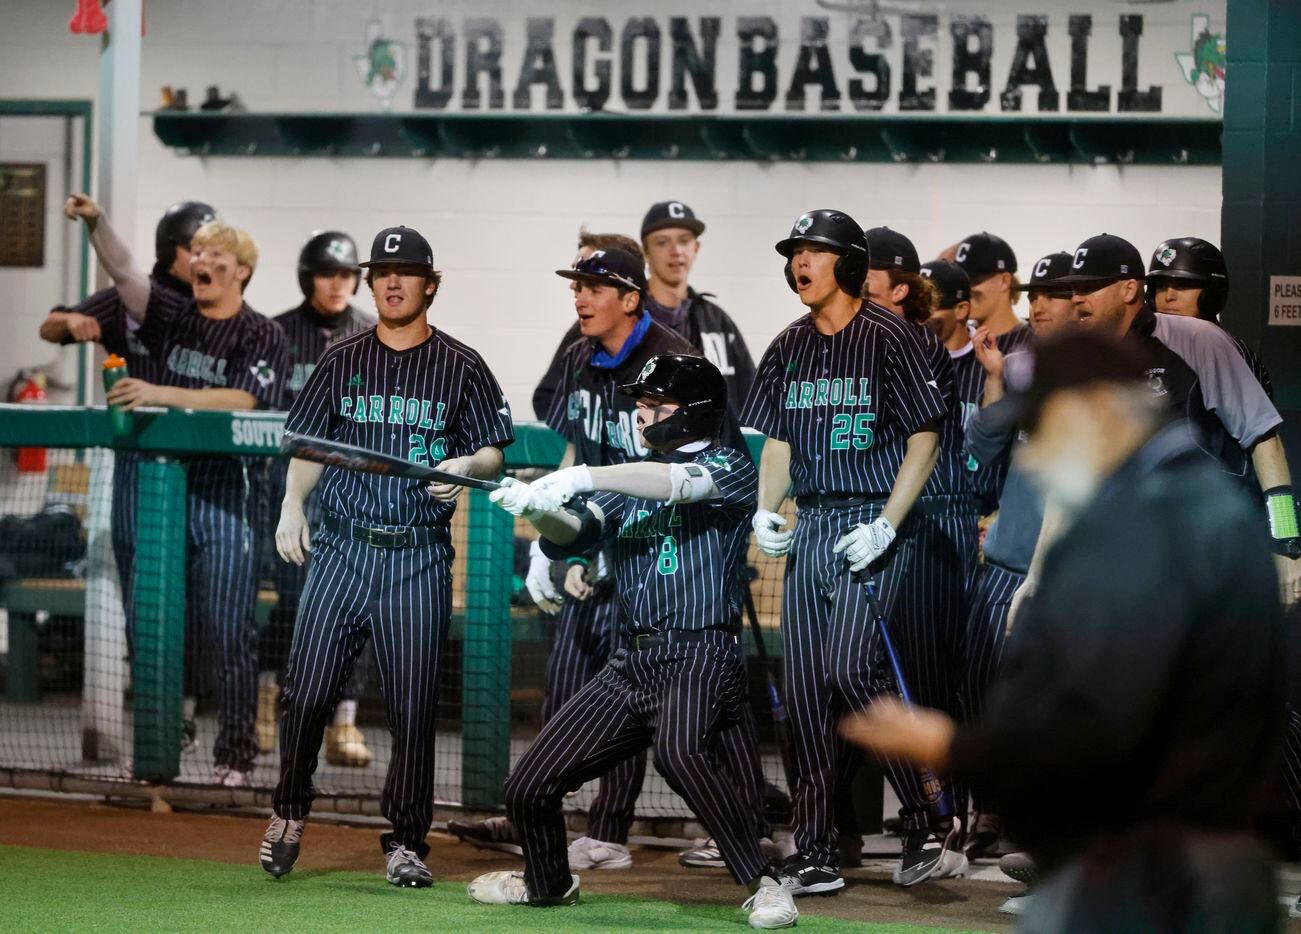 Southlake players, including Ryan Pehrson (8) celebrate as they scored one of three runs int he the 5th inning against Keller, during a Class District 4-6A baseball game in Southlake, Texas on March 19, 2021. (Michael Ainsworth/Special Contributor)